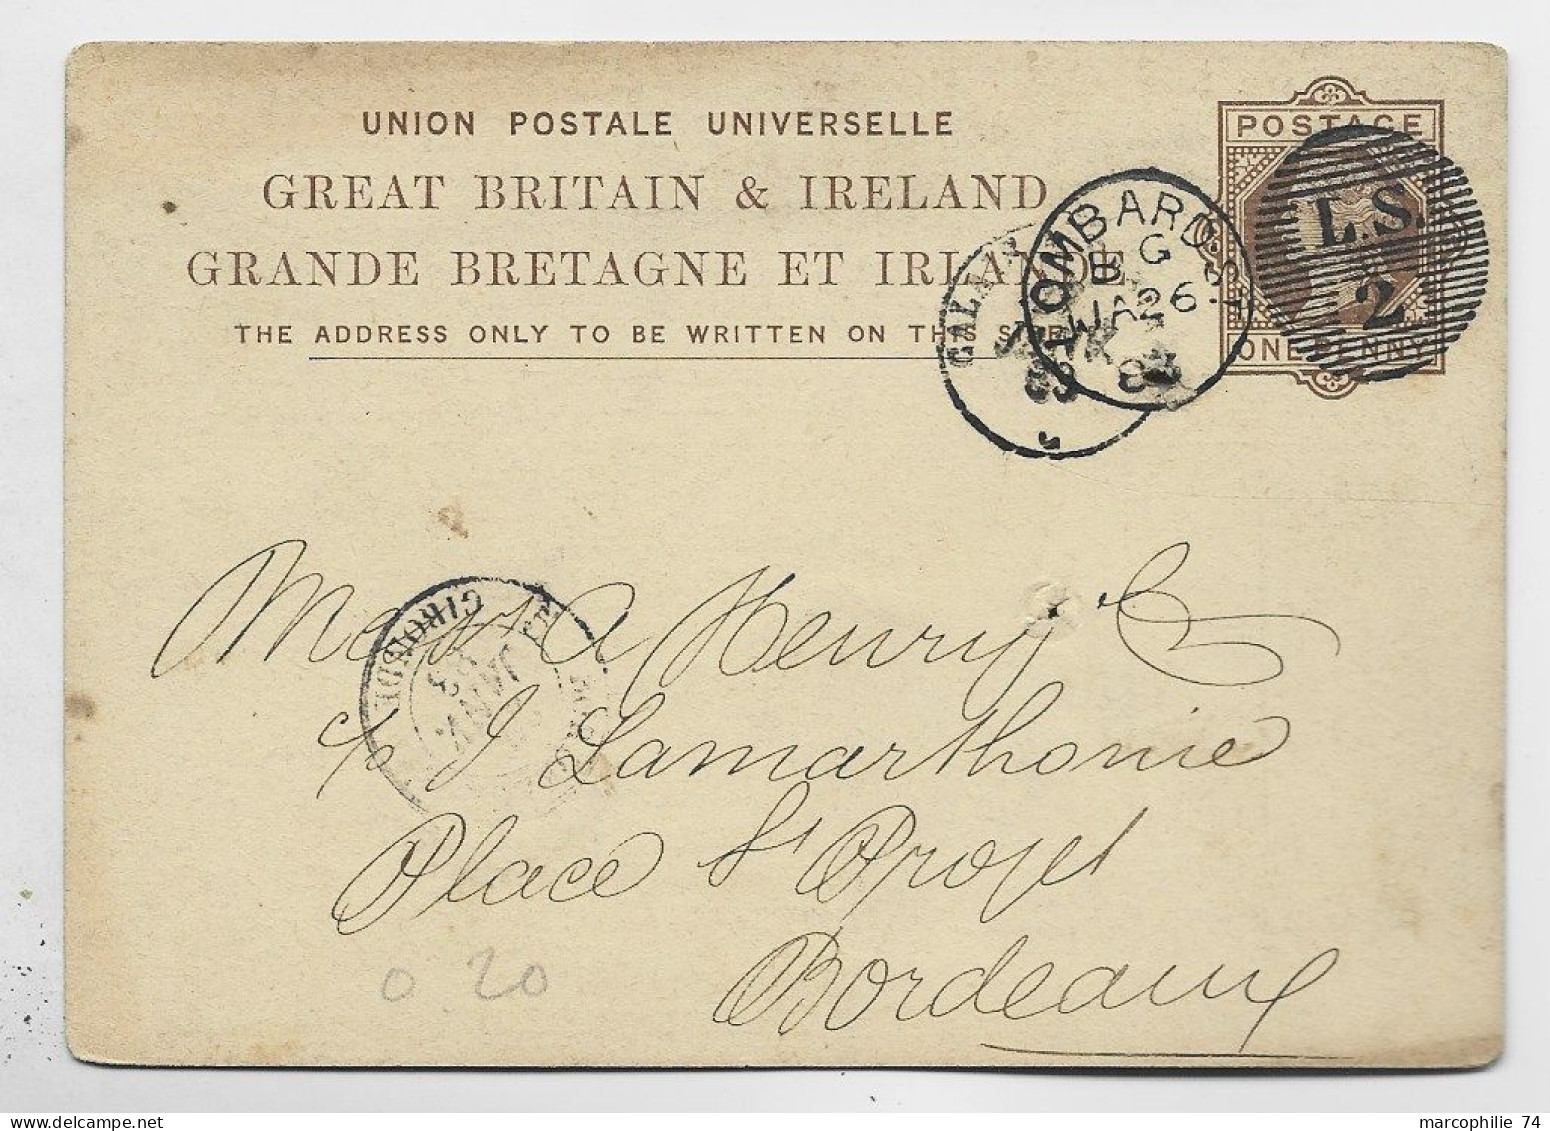 ENGLAND ENTIER GREAT BRITAIN IRELAND ONE PENNY POST CARD REPIQUAGE GENERAM STEAM NAVIGATION LOMBARD 1893 TO FRANCE - Material Postal